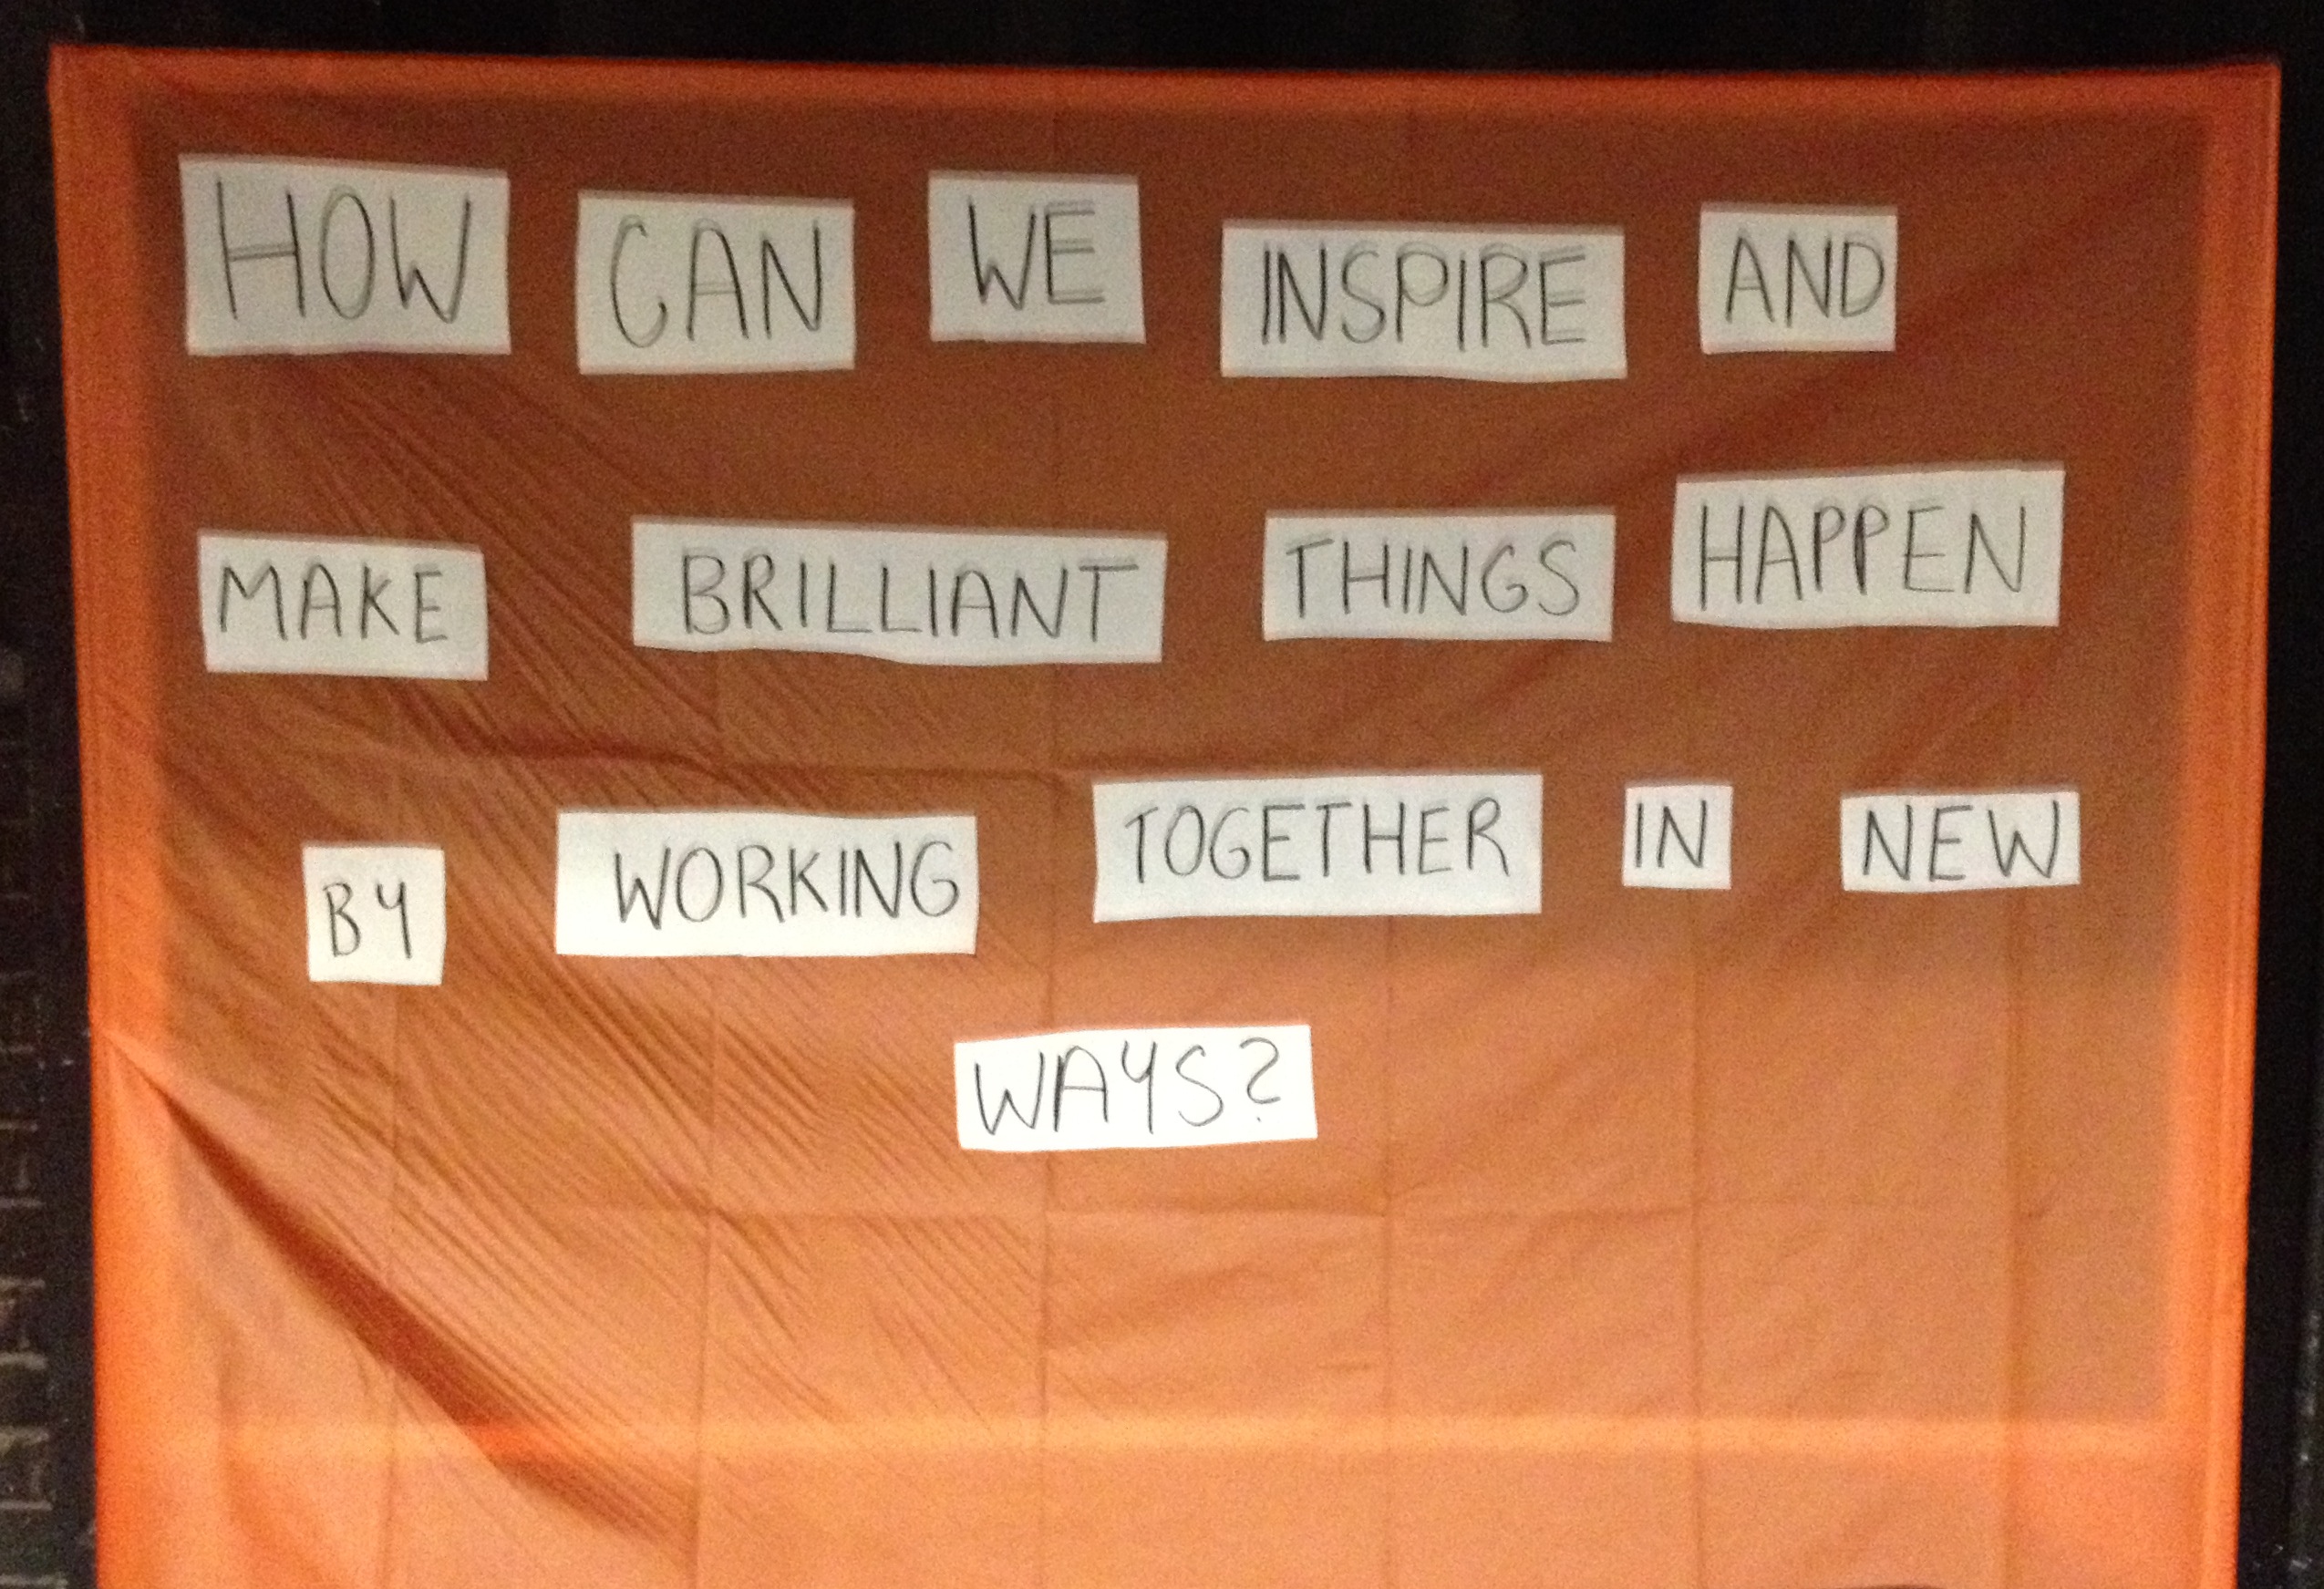 'How Can We Inspire and Make Brilliant Things Happen by Working Together in New 